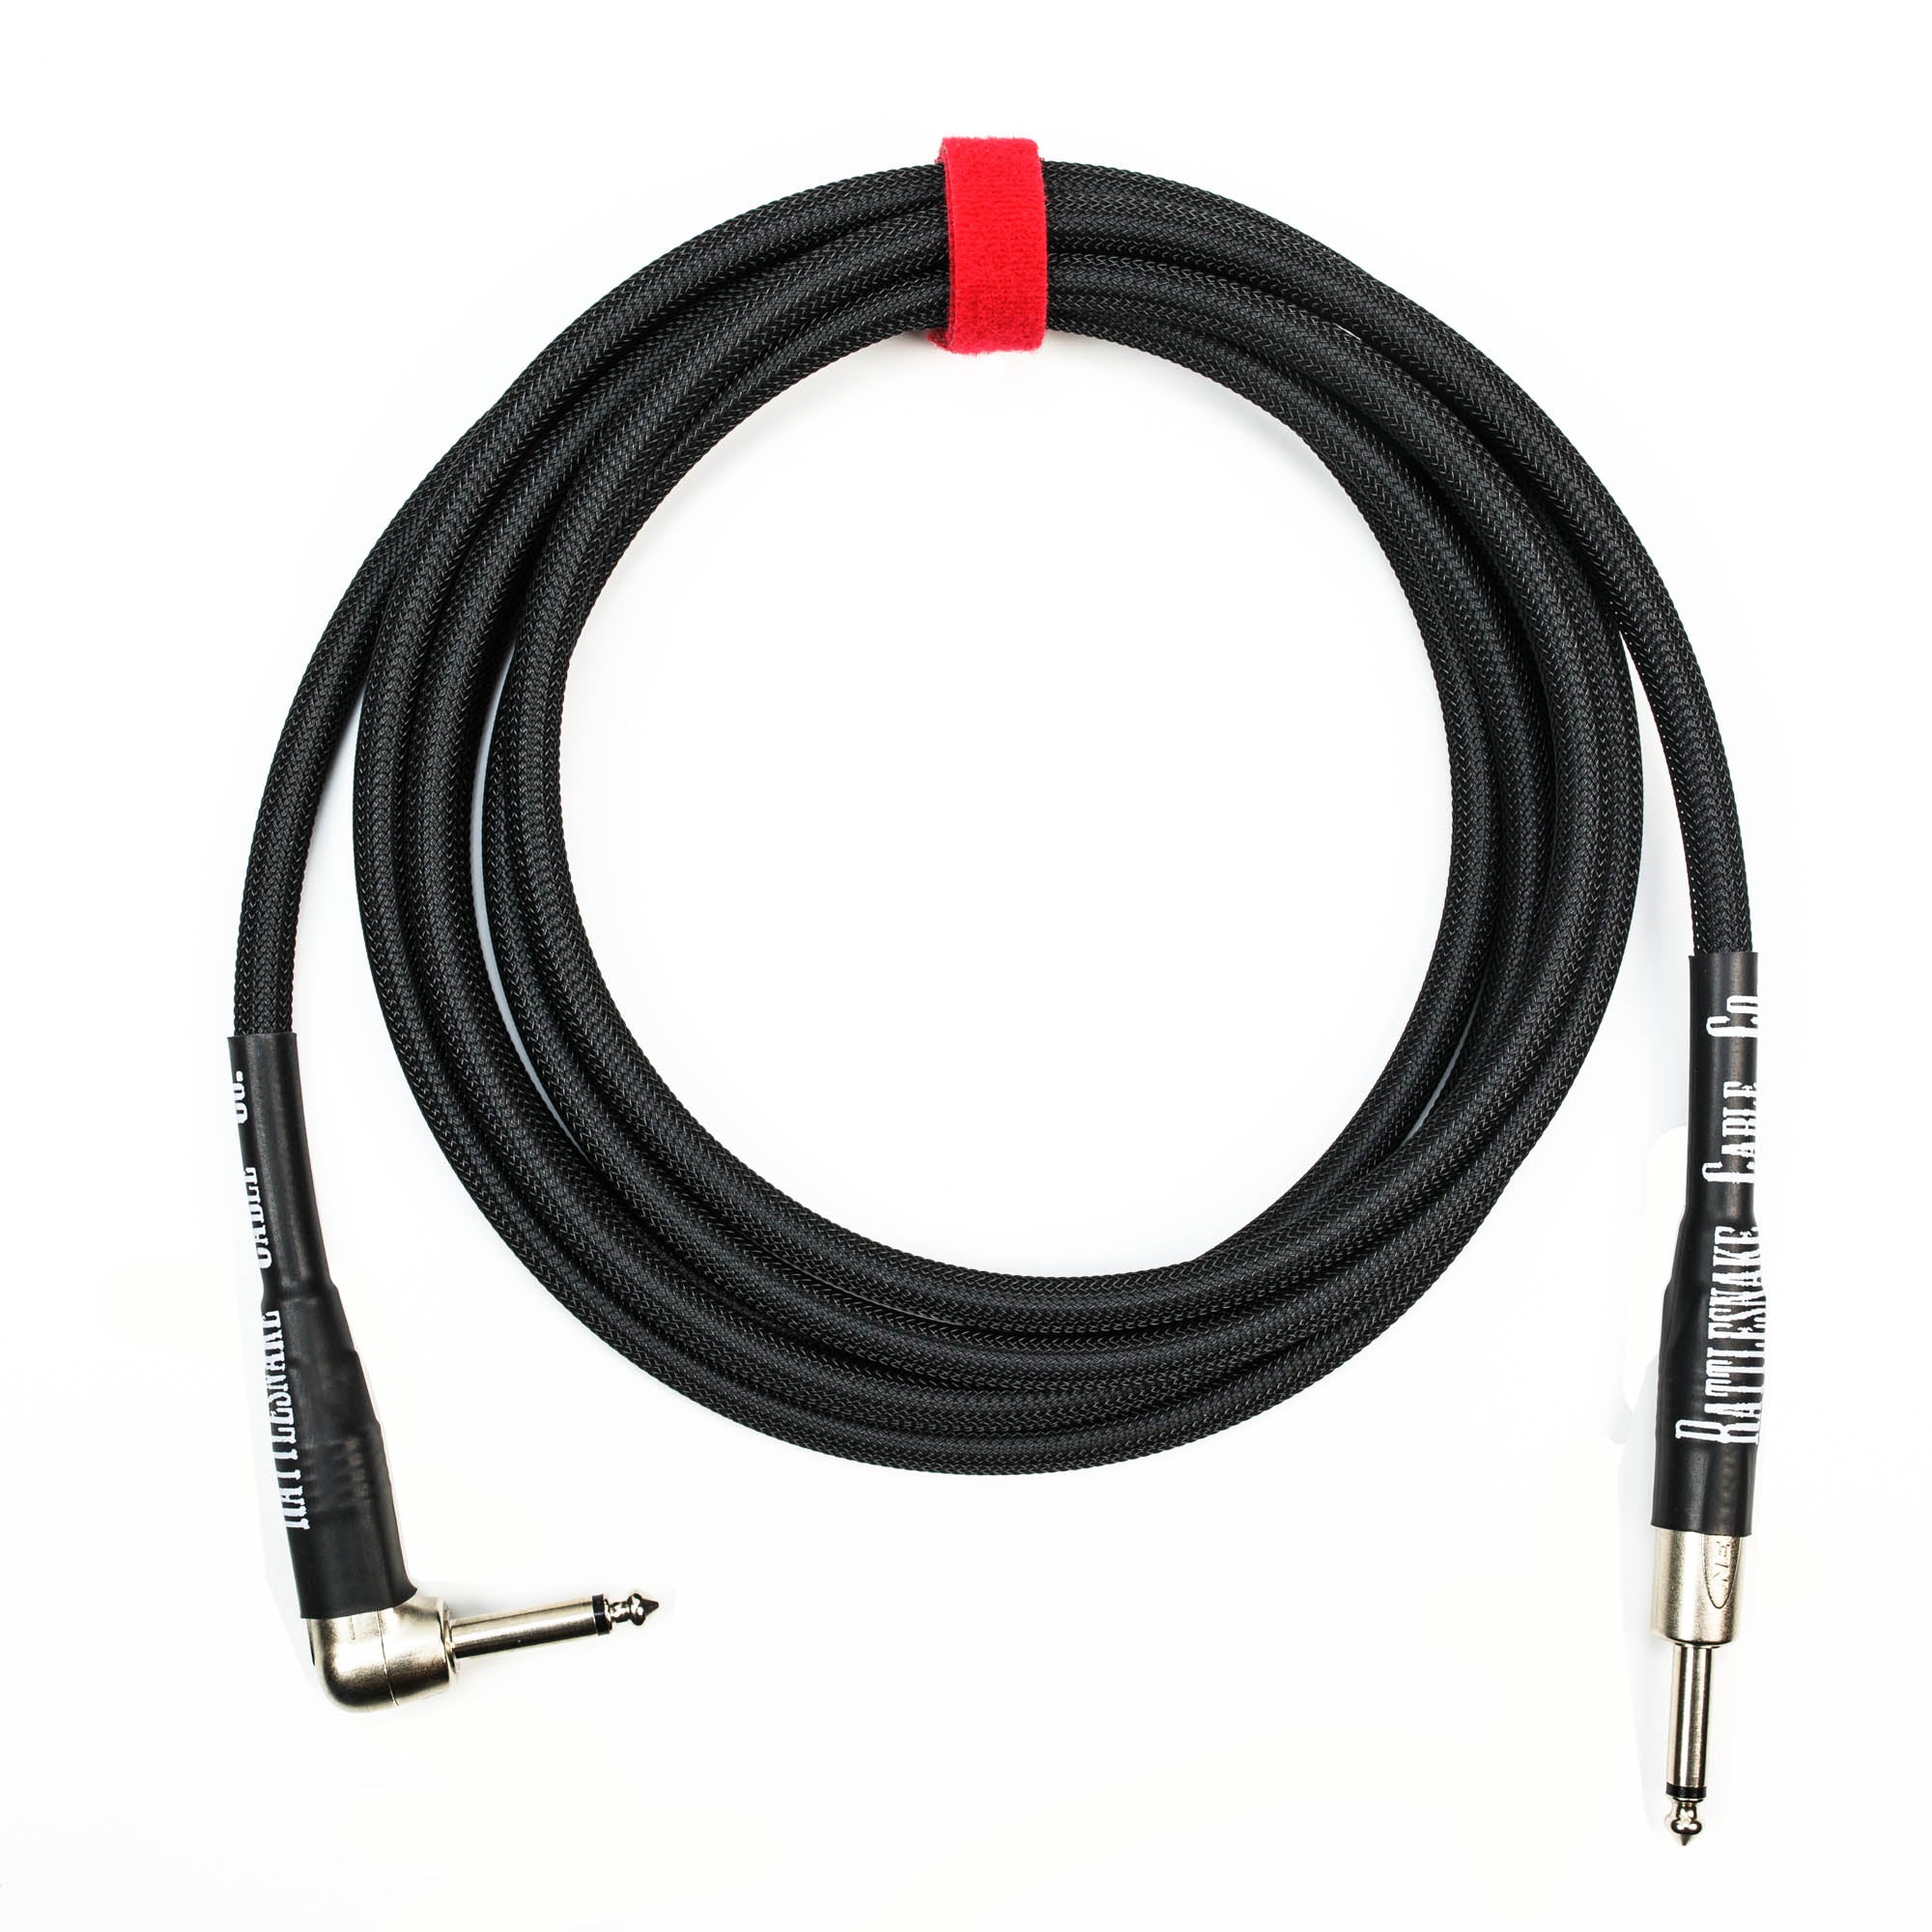 Rattlesnake Cable Company 10' Black Guitar Cable - Mixed Plugs